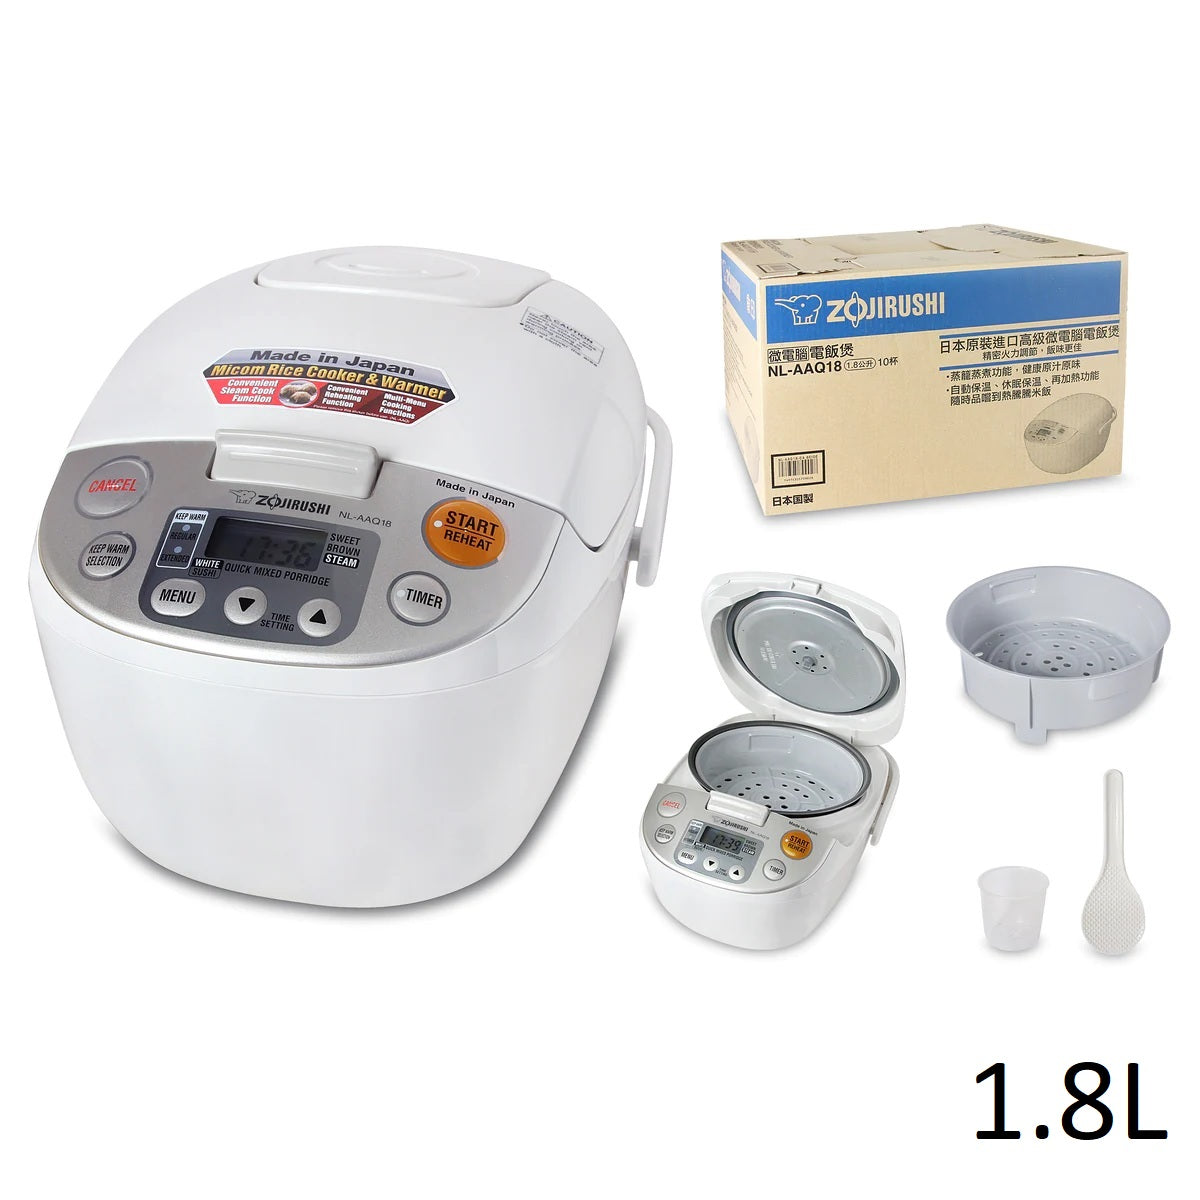 Zojirushi Rice Cooker with Steamer NL-AAQ10/18 (Made in Japan)